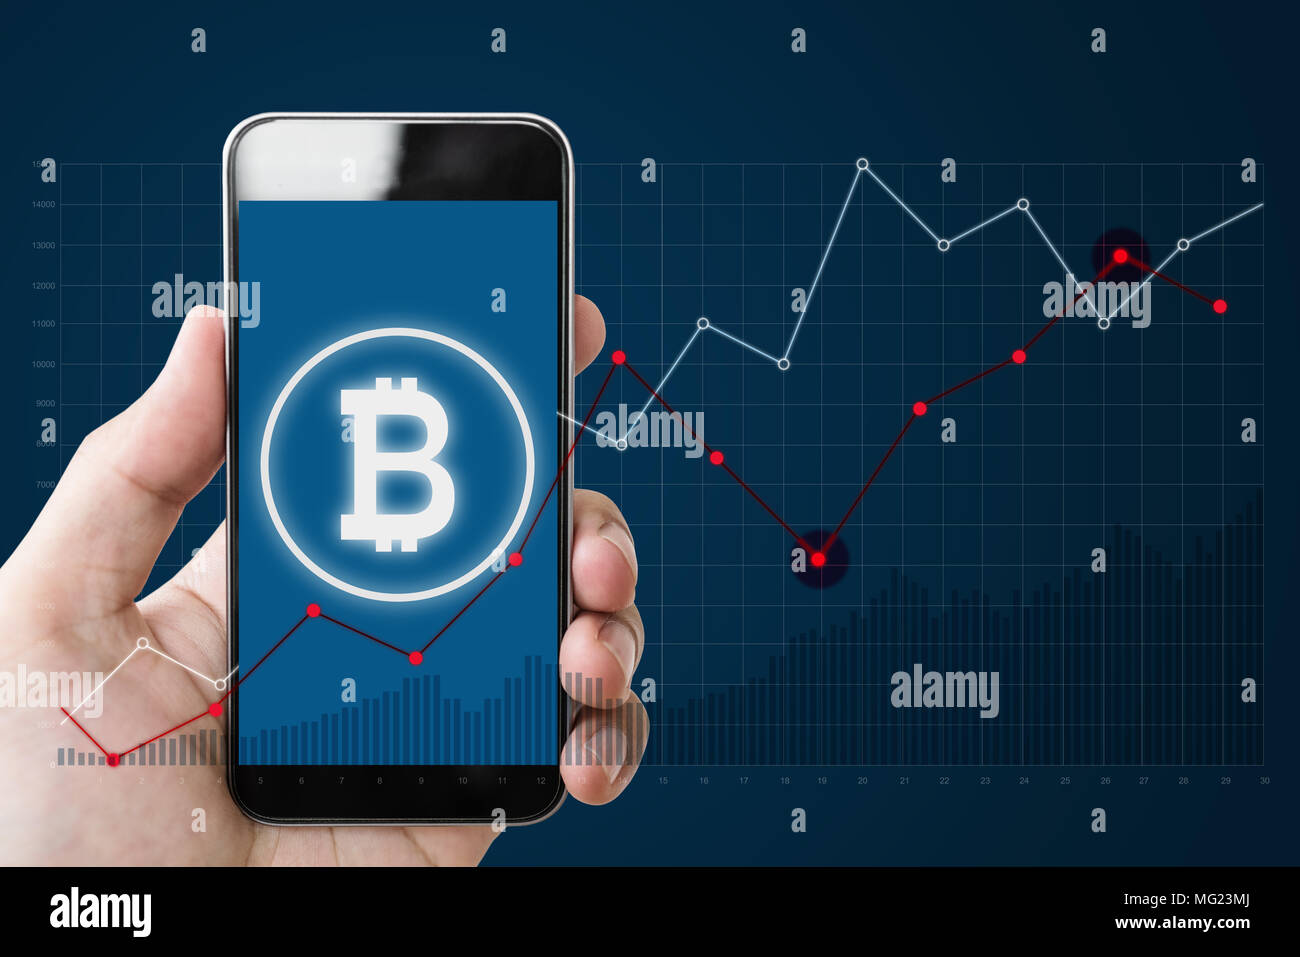 Hand holding mobile smartphone with B symbol of Bitcoin, internet banking and block chain on screen and raising graph background Stock Photo